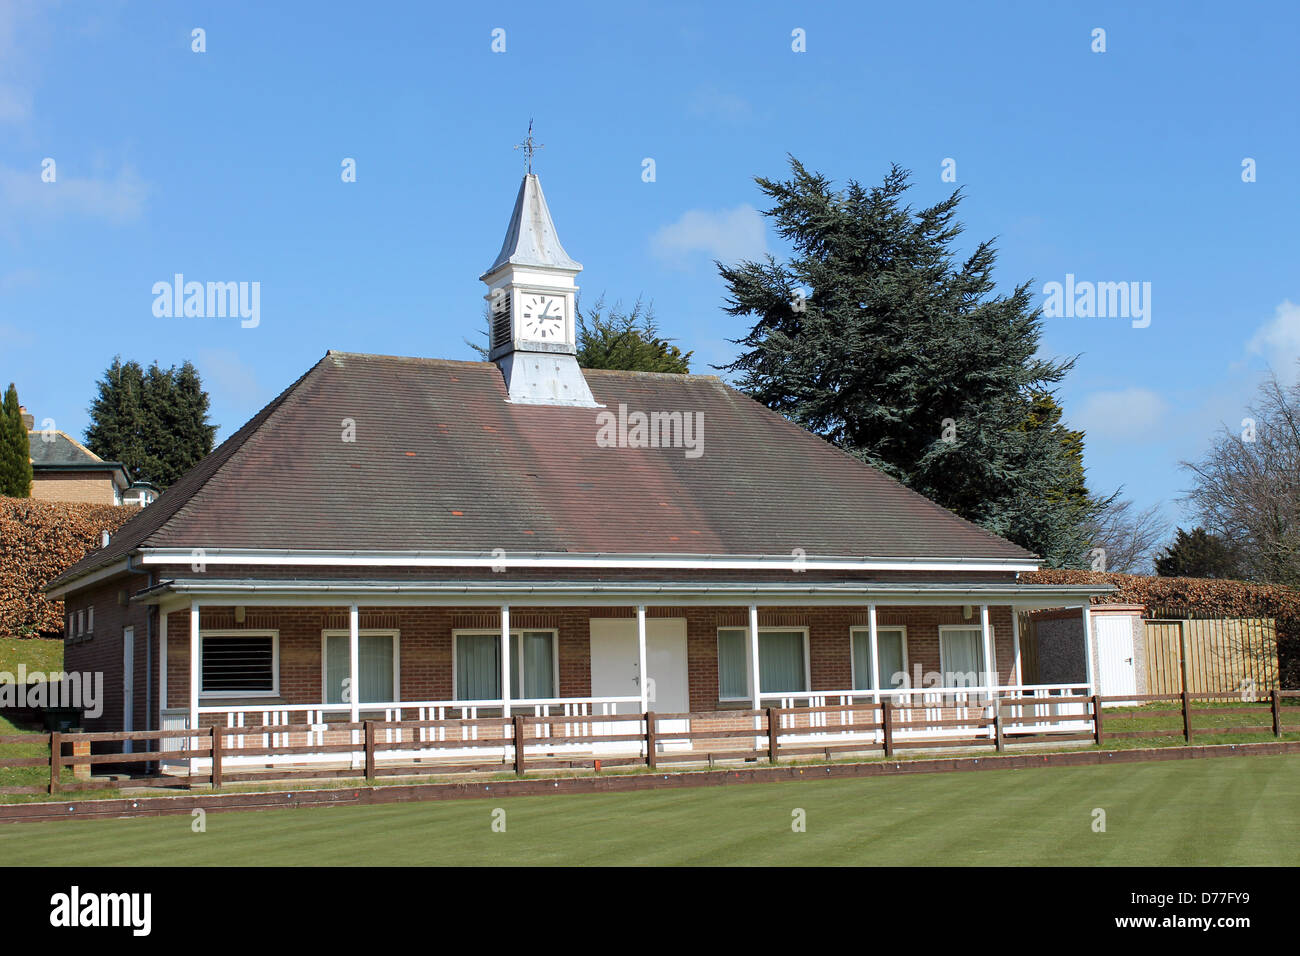 Bowling green pavilion with blue sky background, Scarborough, England. Stock Photo